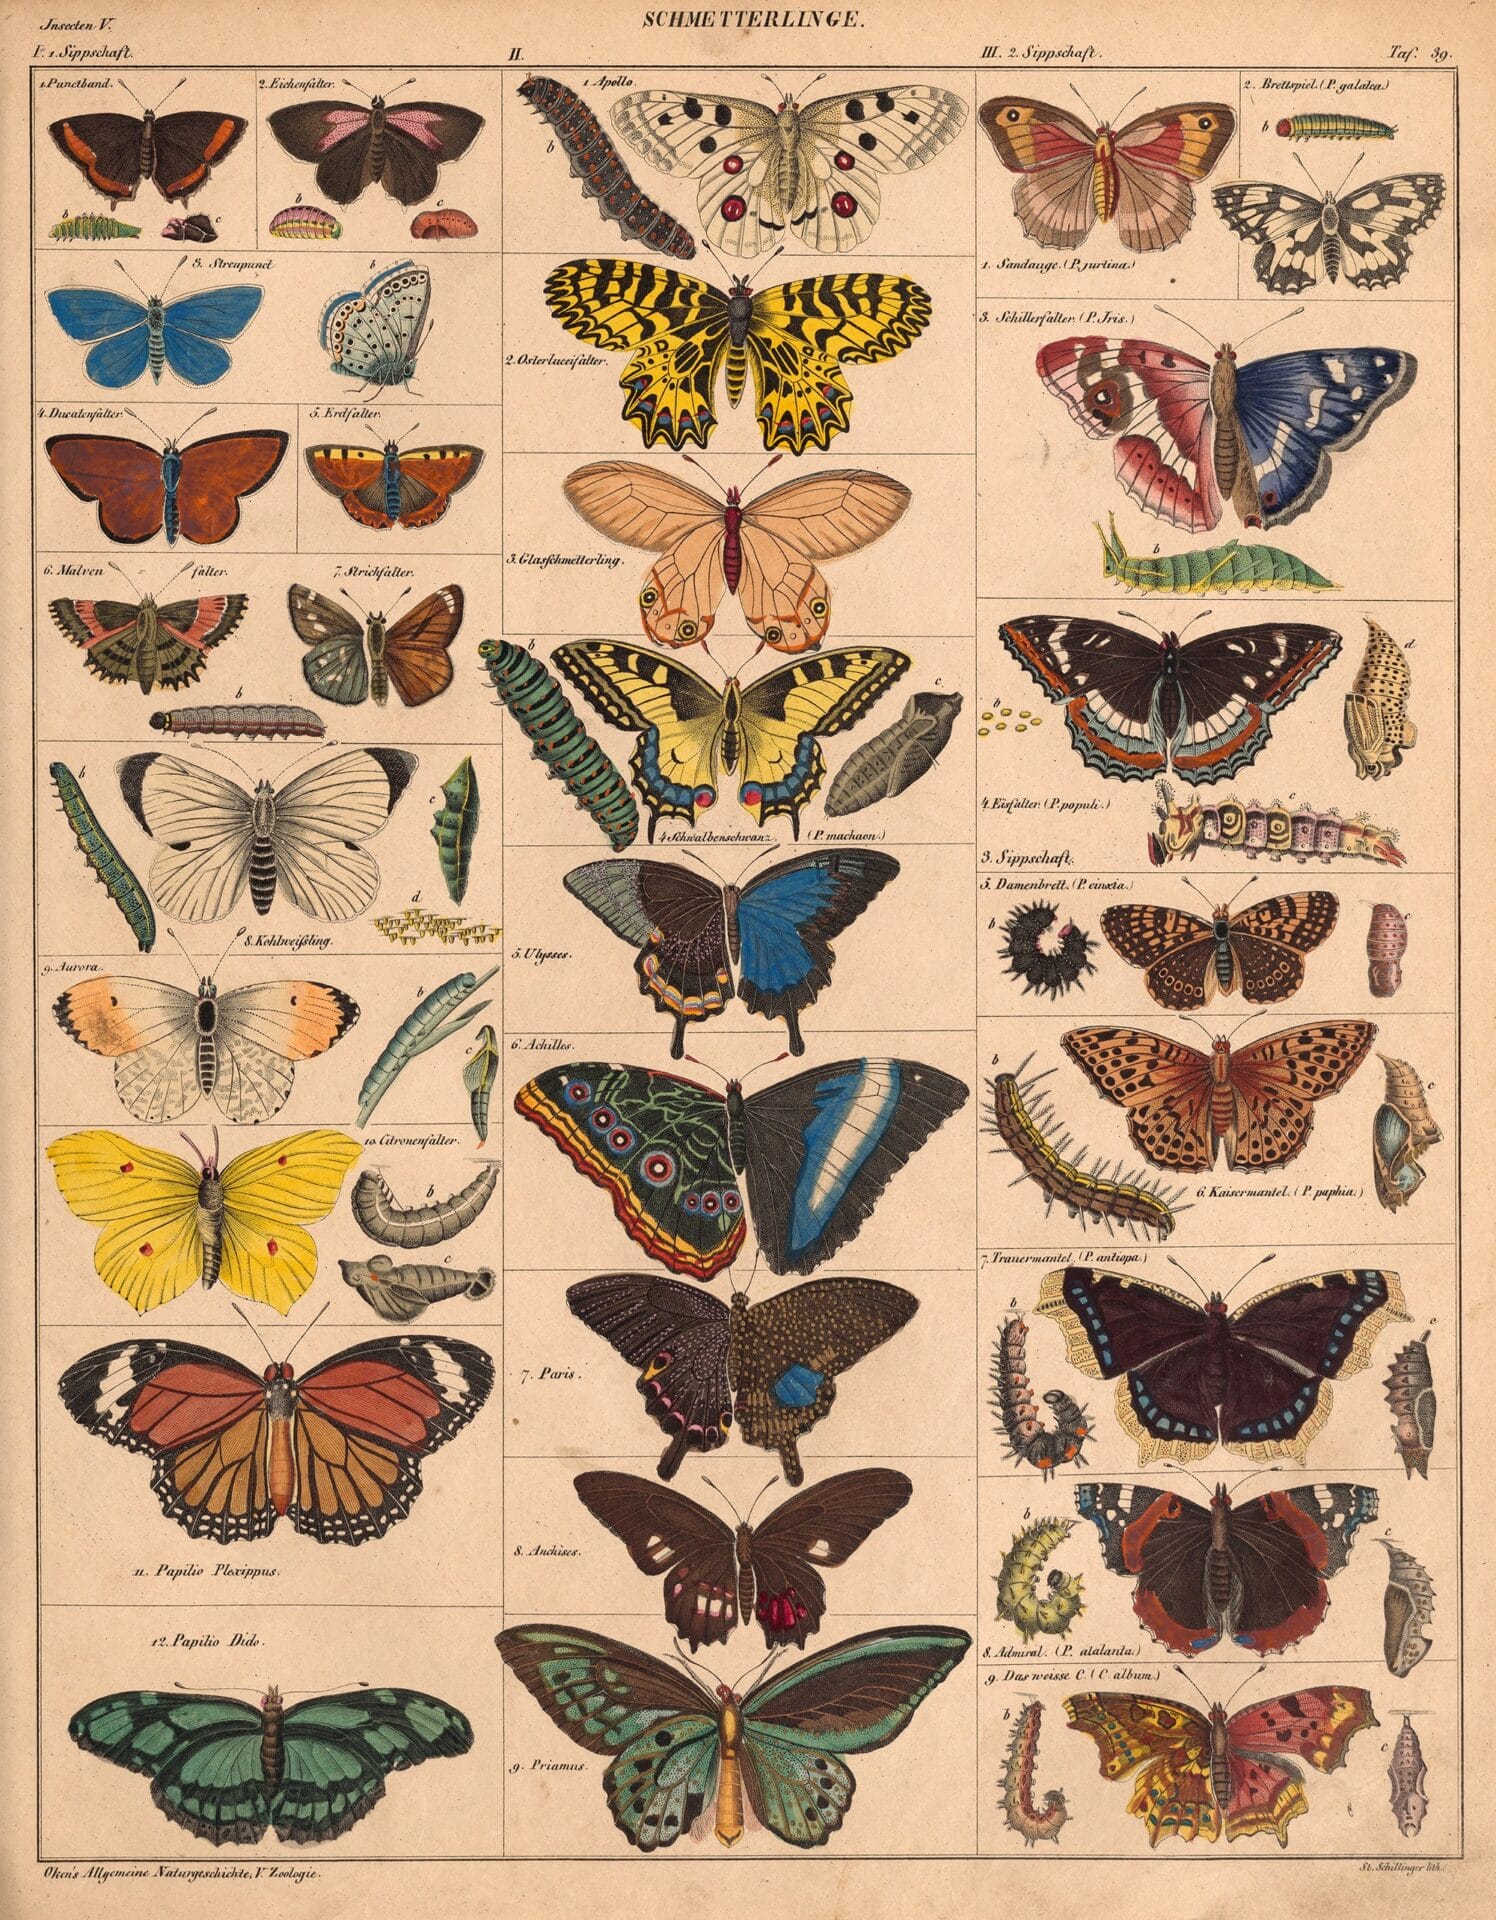 an 18th-century natural history book illustration of butterflies, some shown at their larval and pupae stages